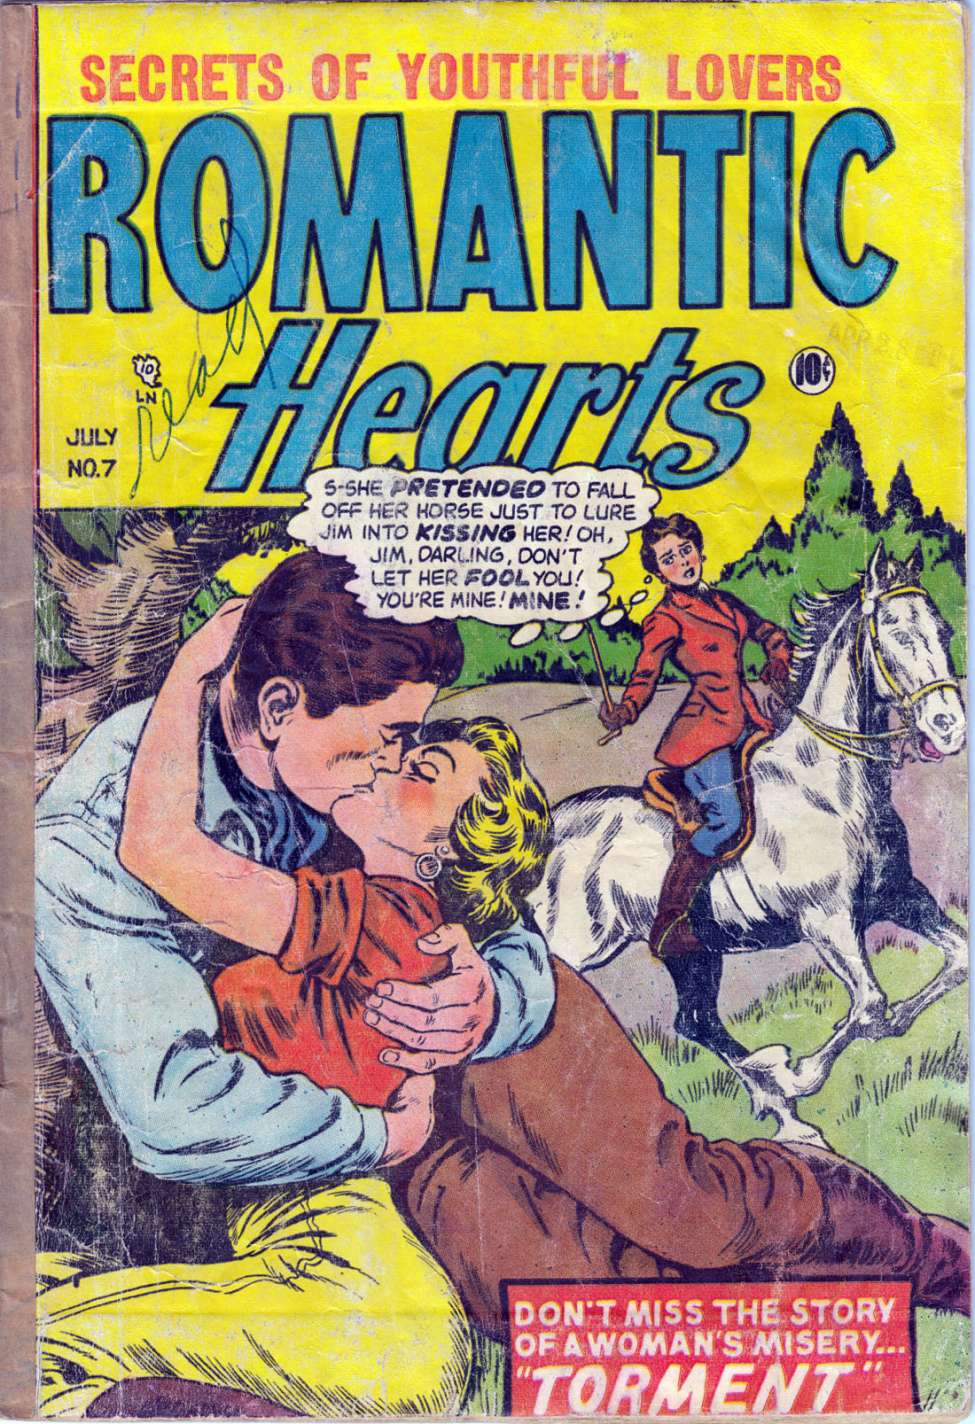 Book Cover For Romantic Hearts v2 7